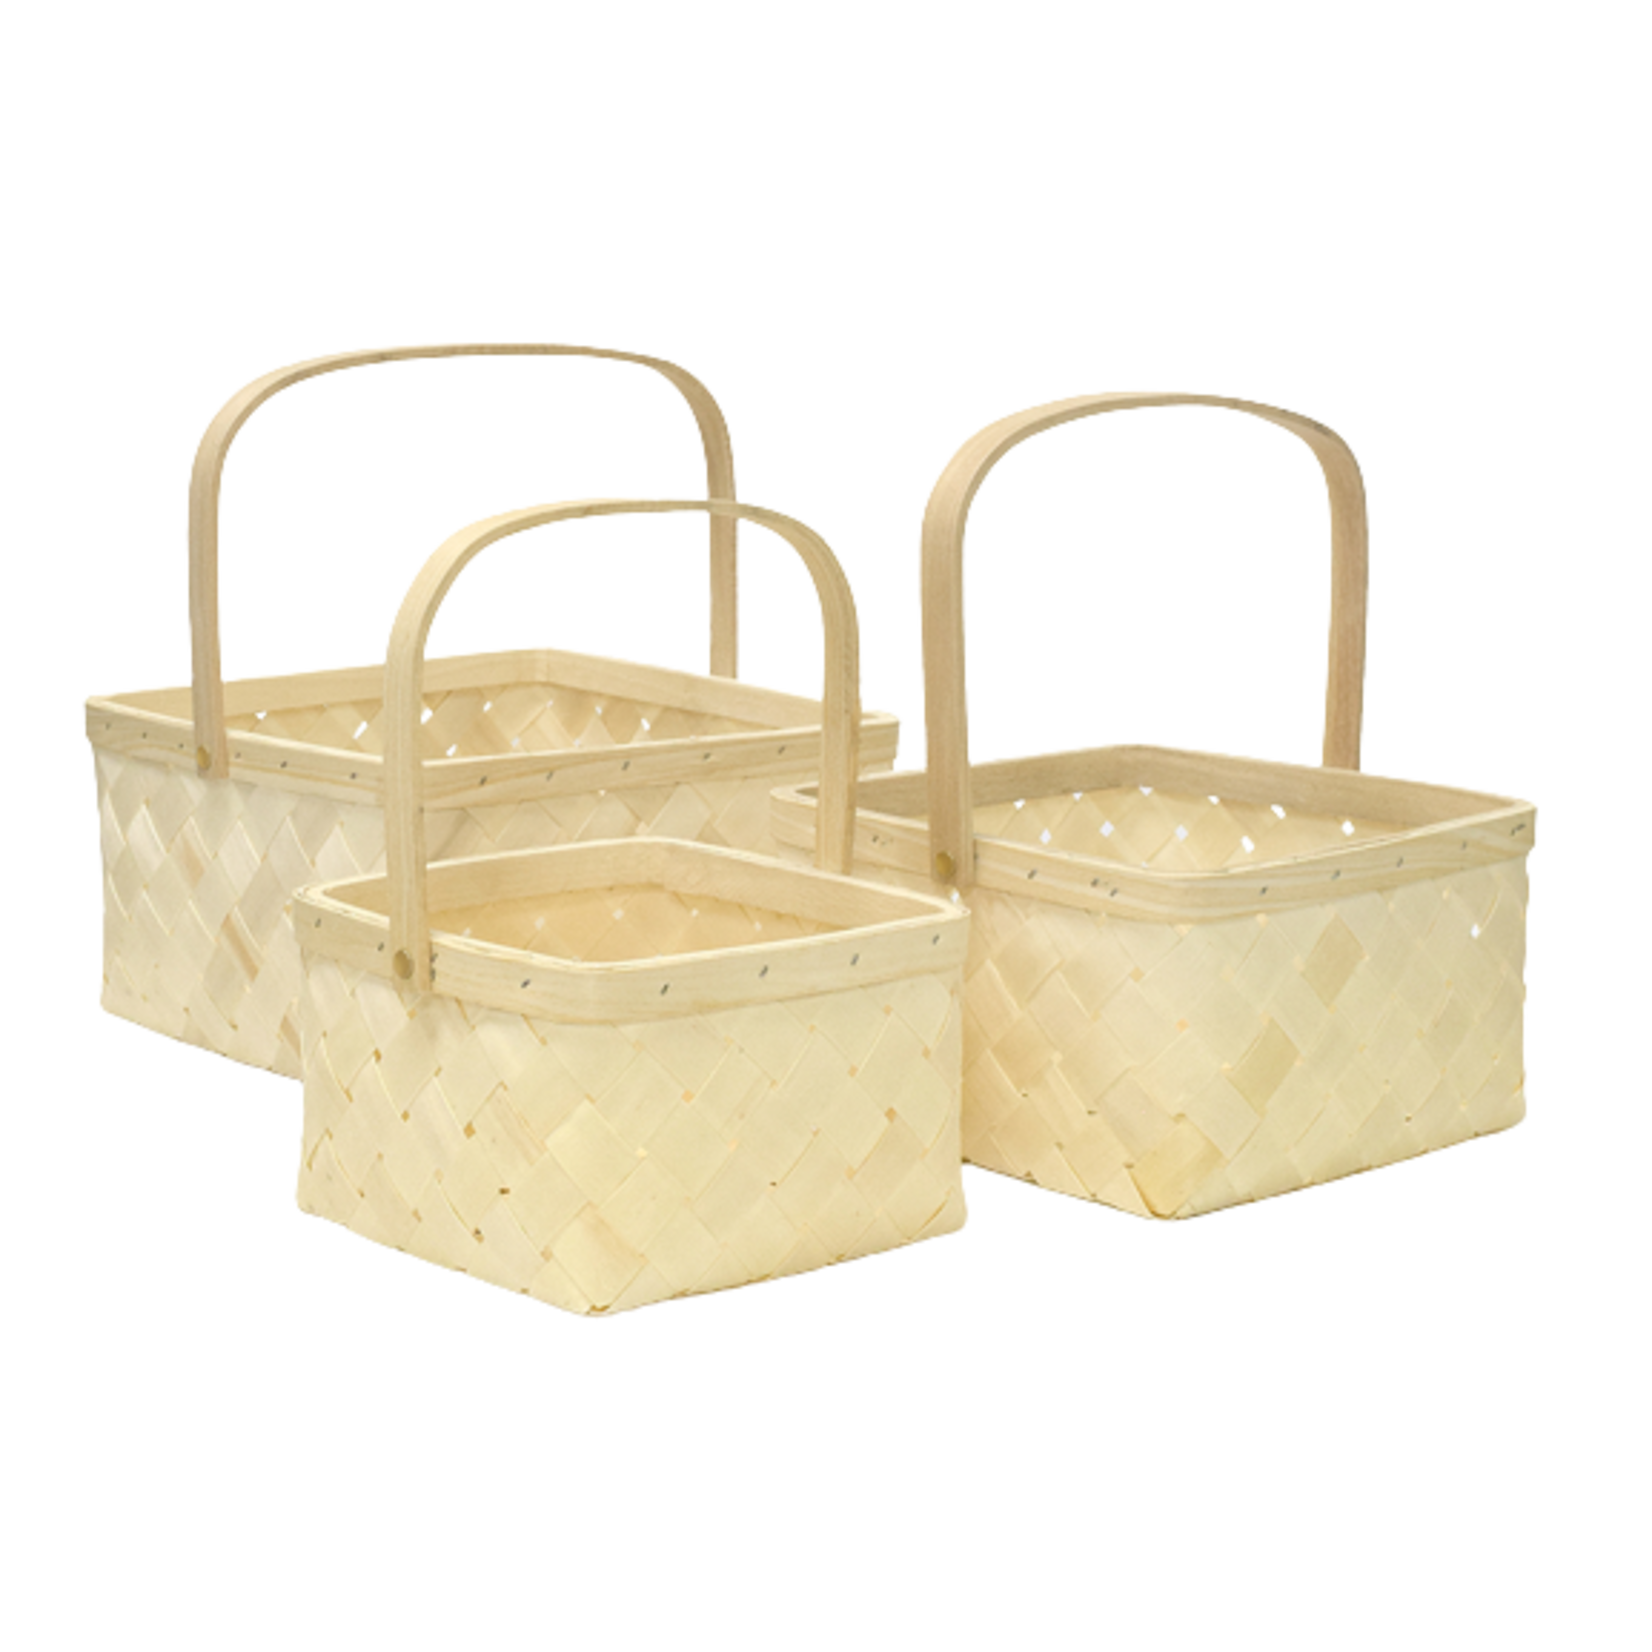 SQUARE WOOD BASKET SET: NATURAL WITH HANDLE - 1 PC